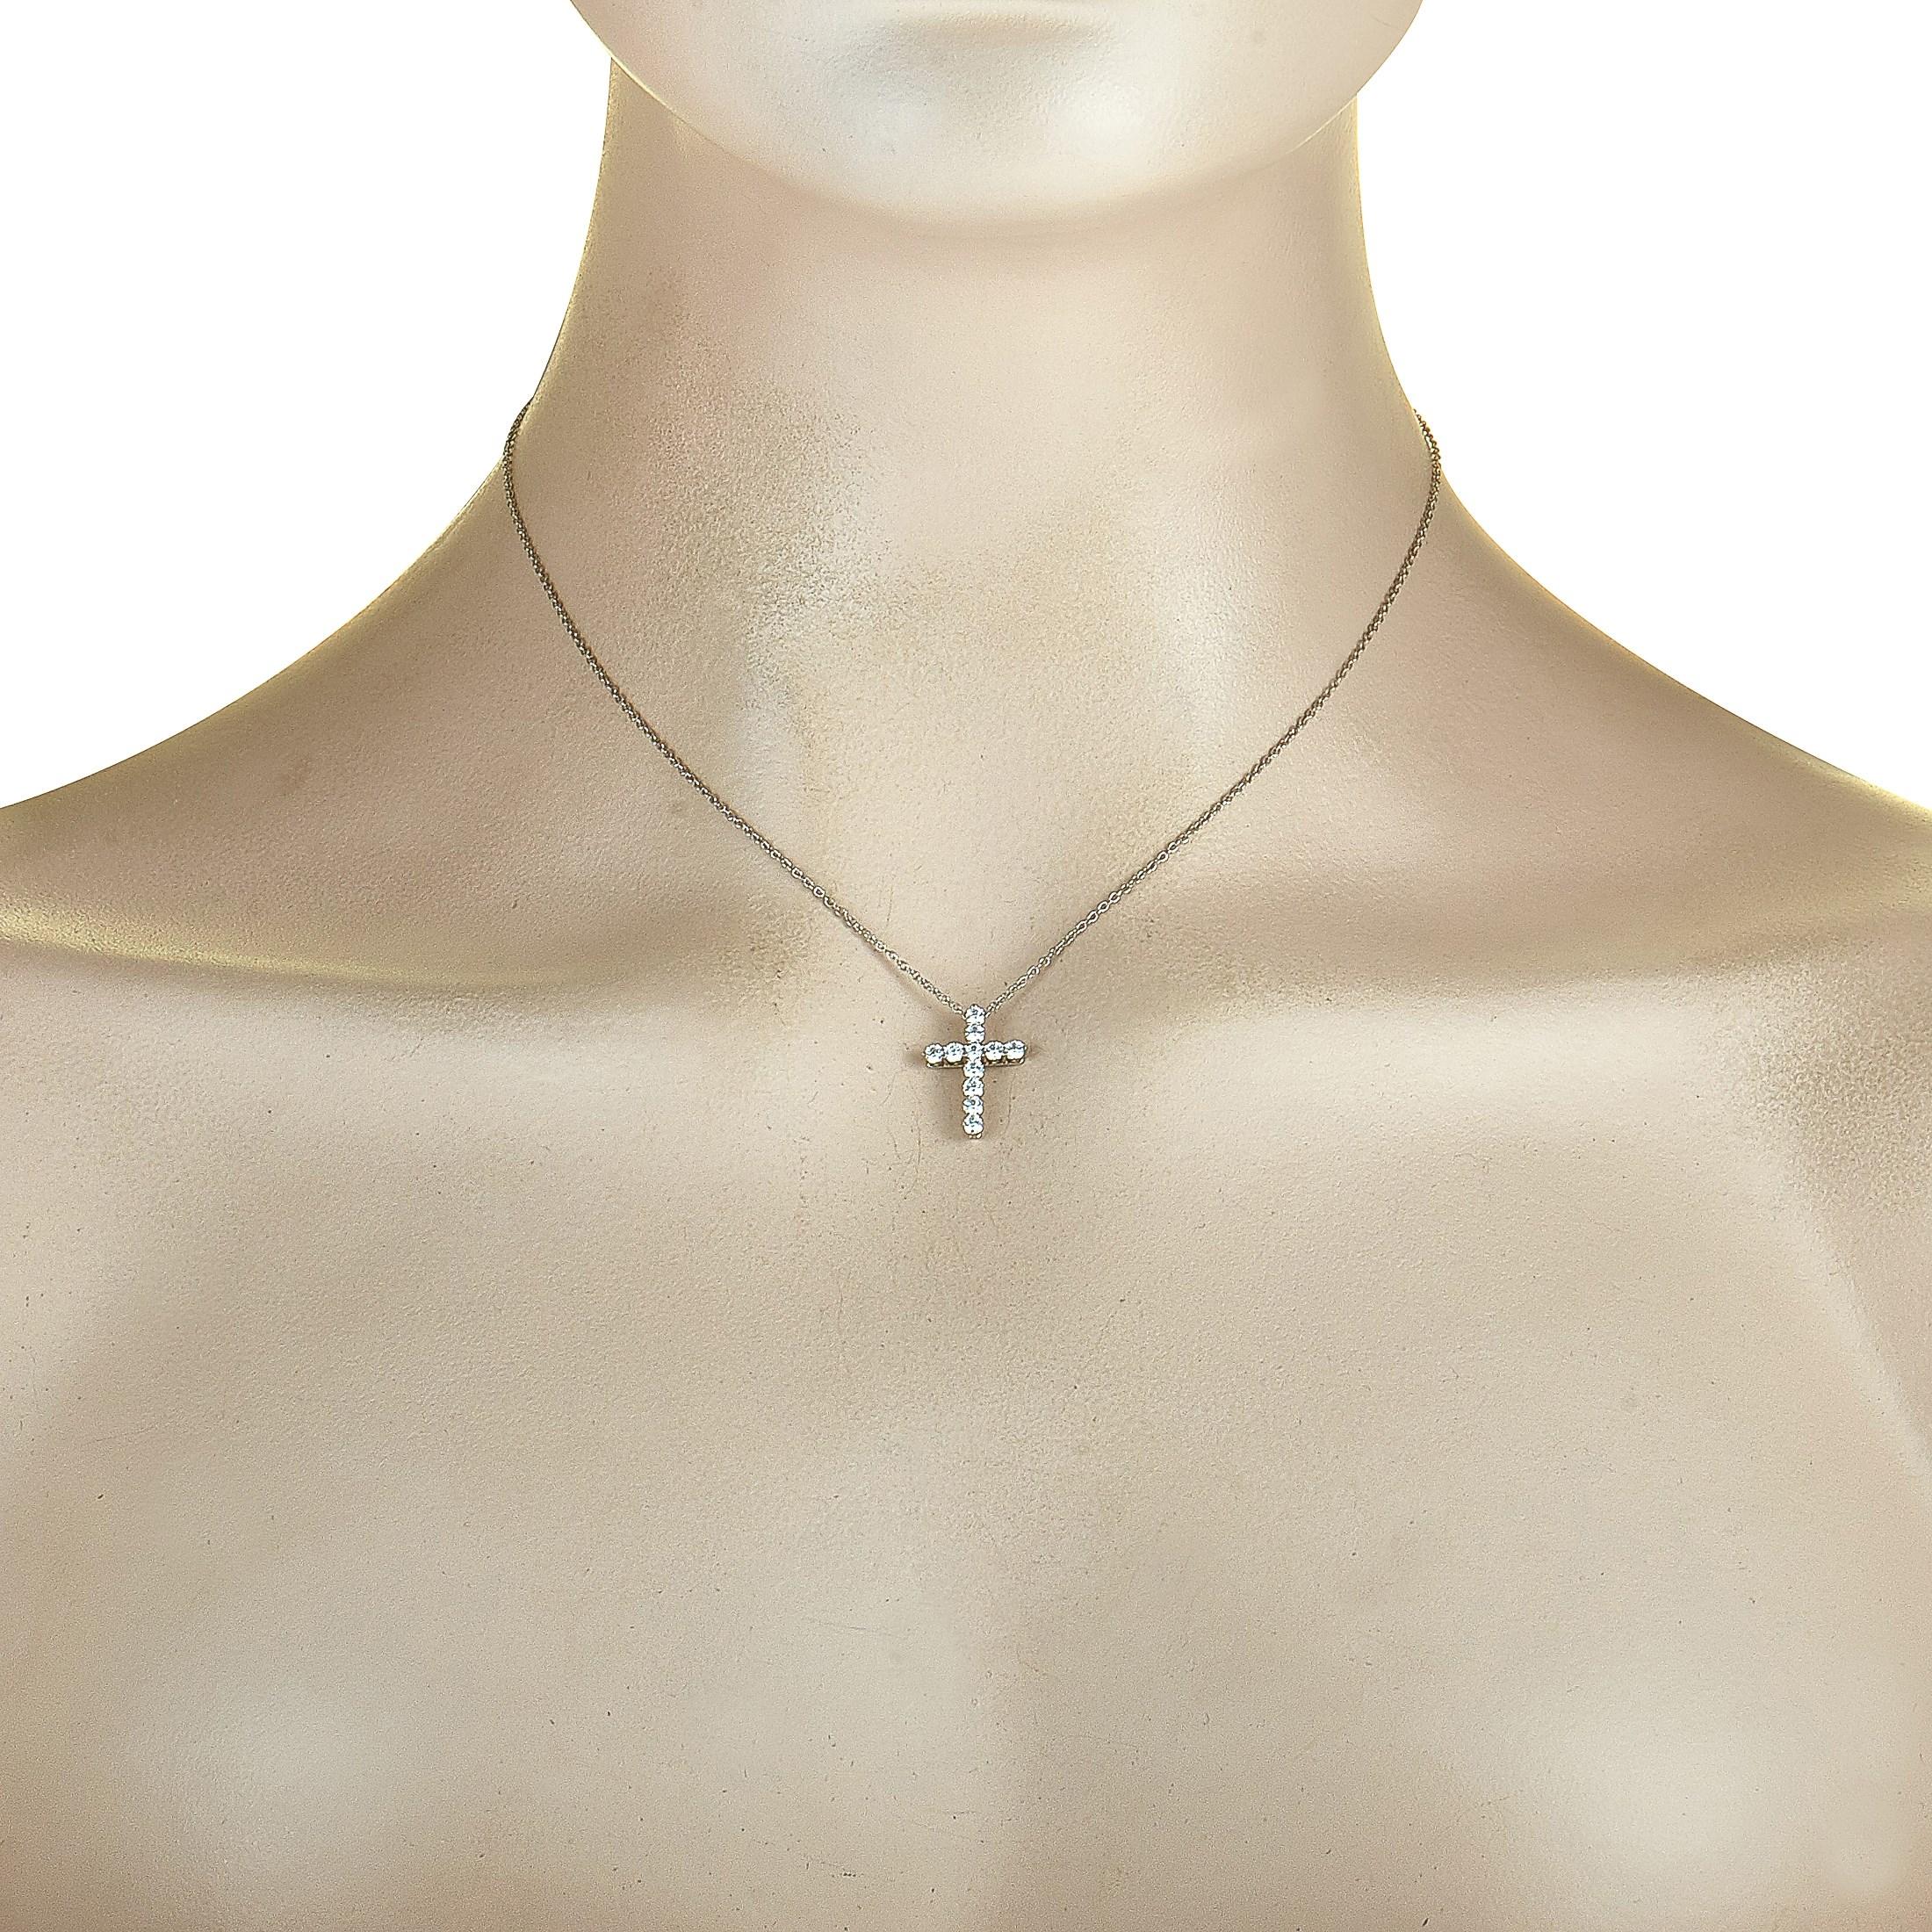 This Tiffany & Co. necklace is crafted from platinum, featuring a 16” chain with spring ring closure and a cross pendant that measures 0.70” in length and 0.50” in width. The necklace is set with a total of 0.42 carats of diamonds that boast grade F